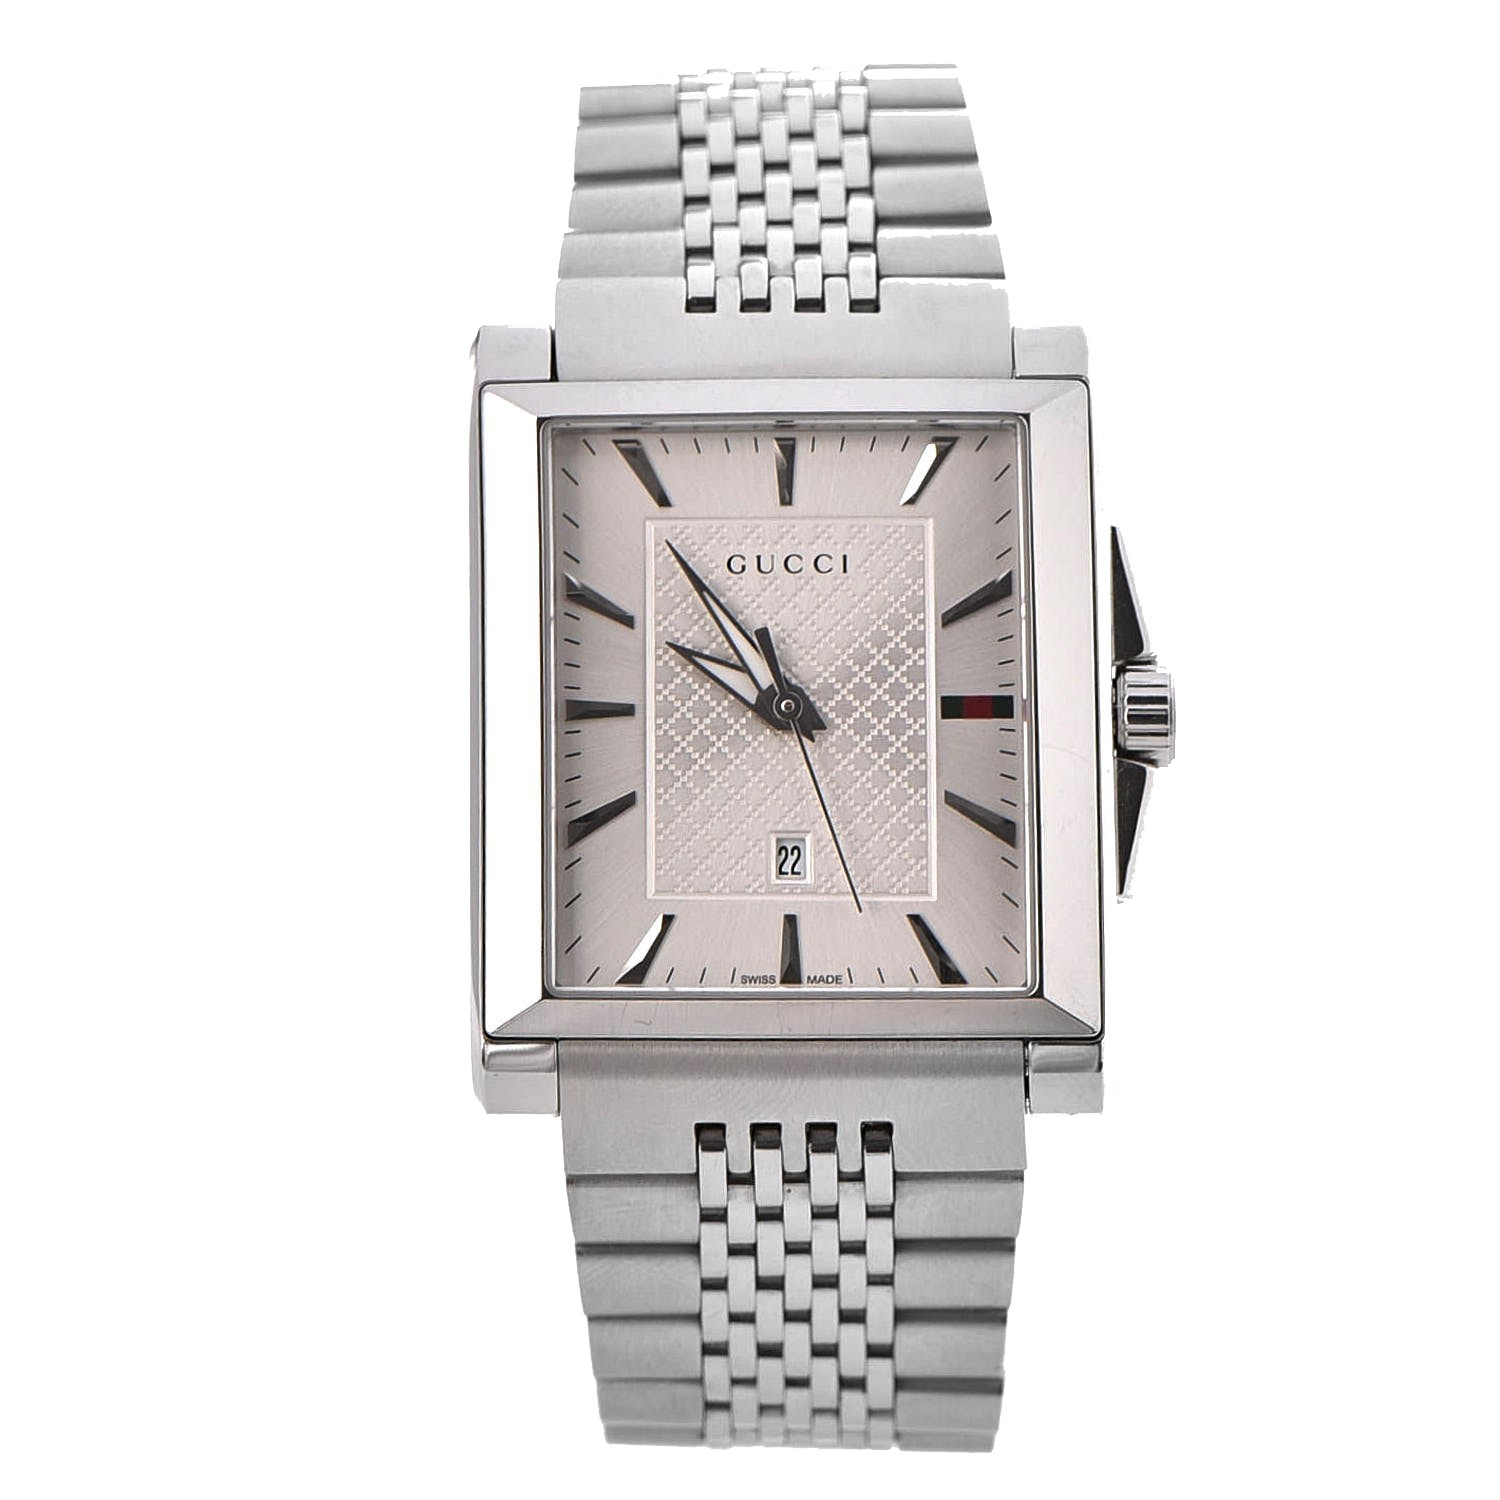 GUCCI Stainless Steel 32mm G-Timeless Rectangle Quartz Watch 232216 ...